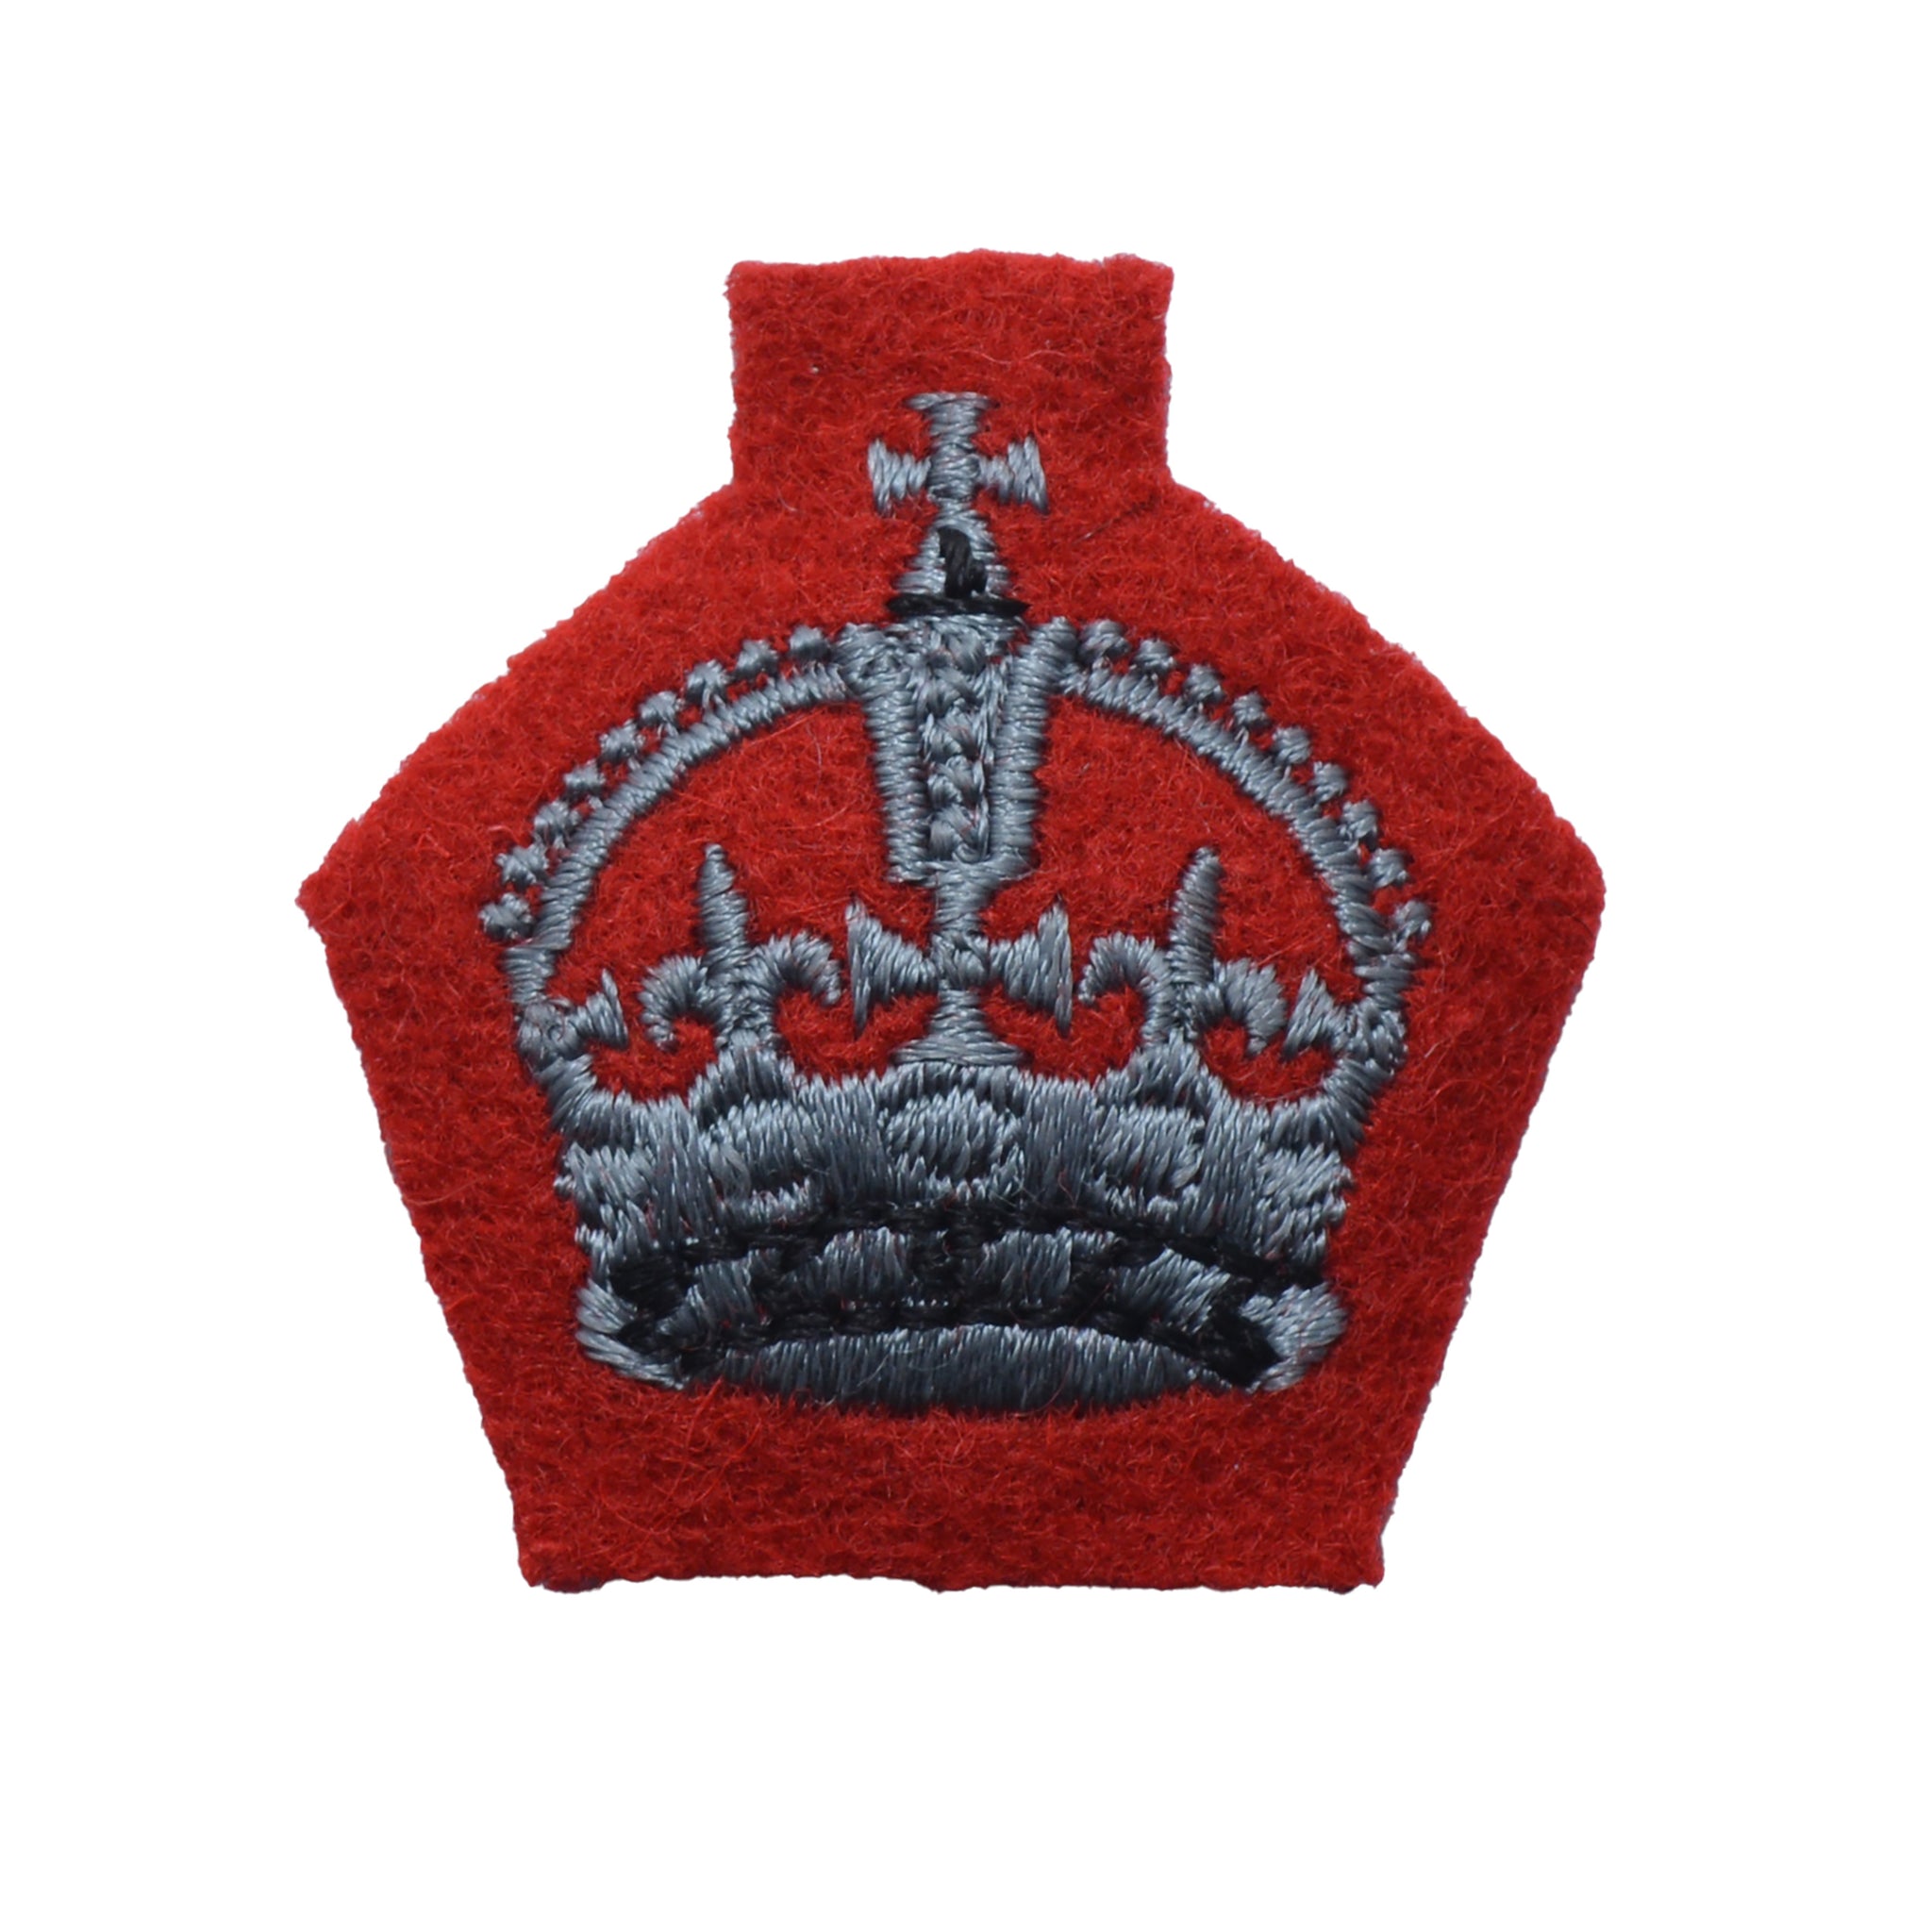 (King's Crown) Staff Sergeants Miniature Rank–Queen Alexandra’s Royal Army Nursing Corps Army Medical Services British Army Badge